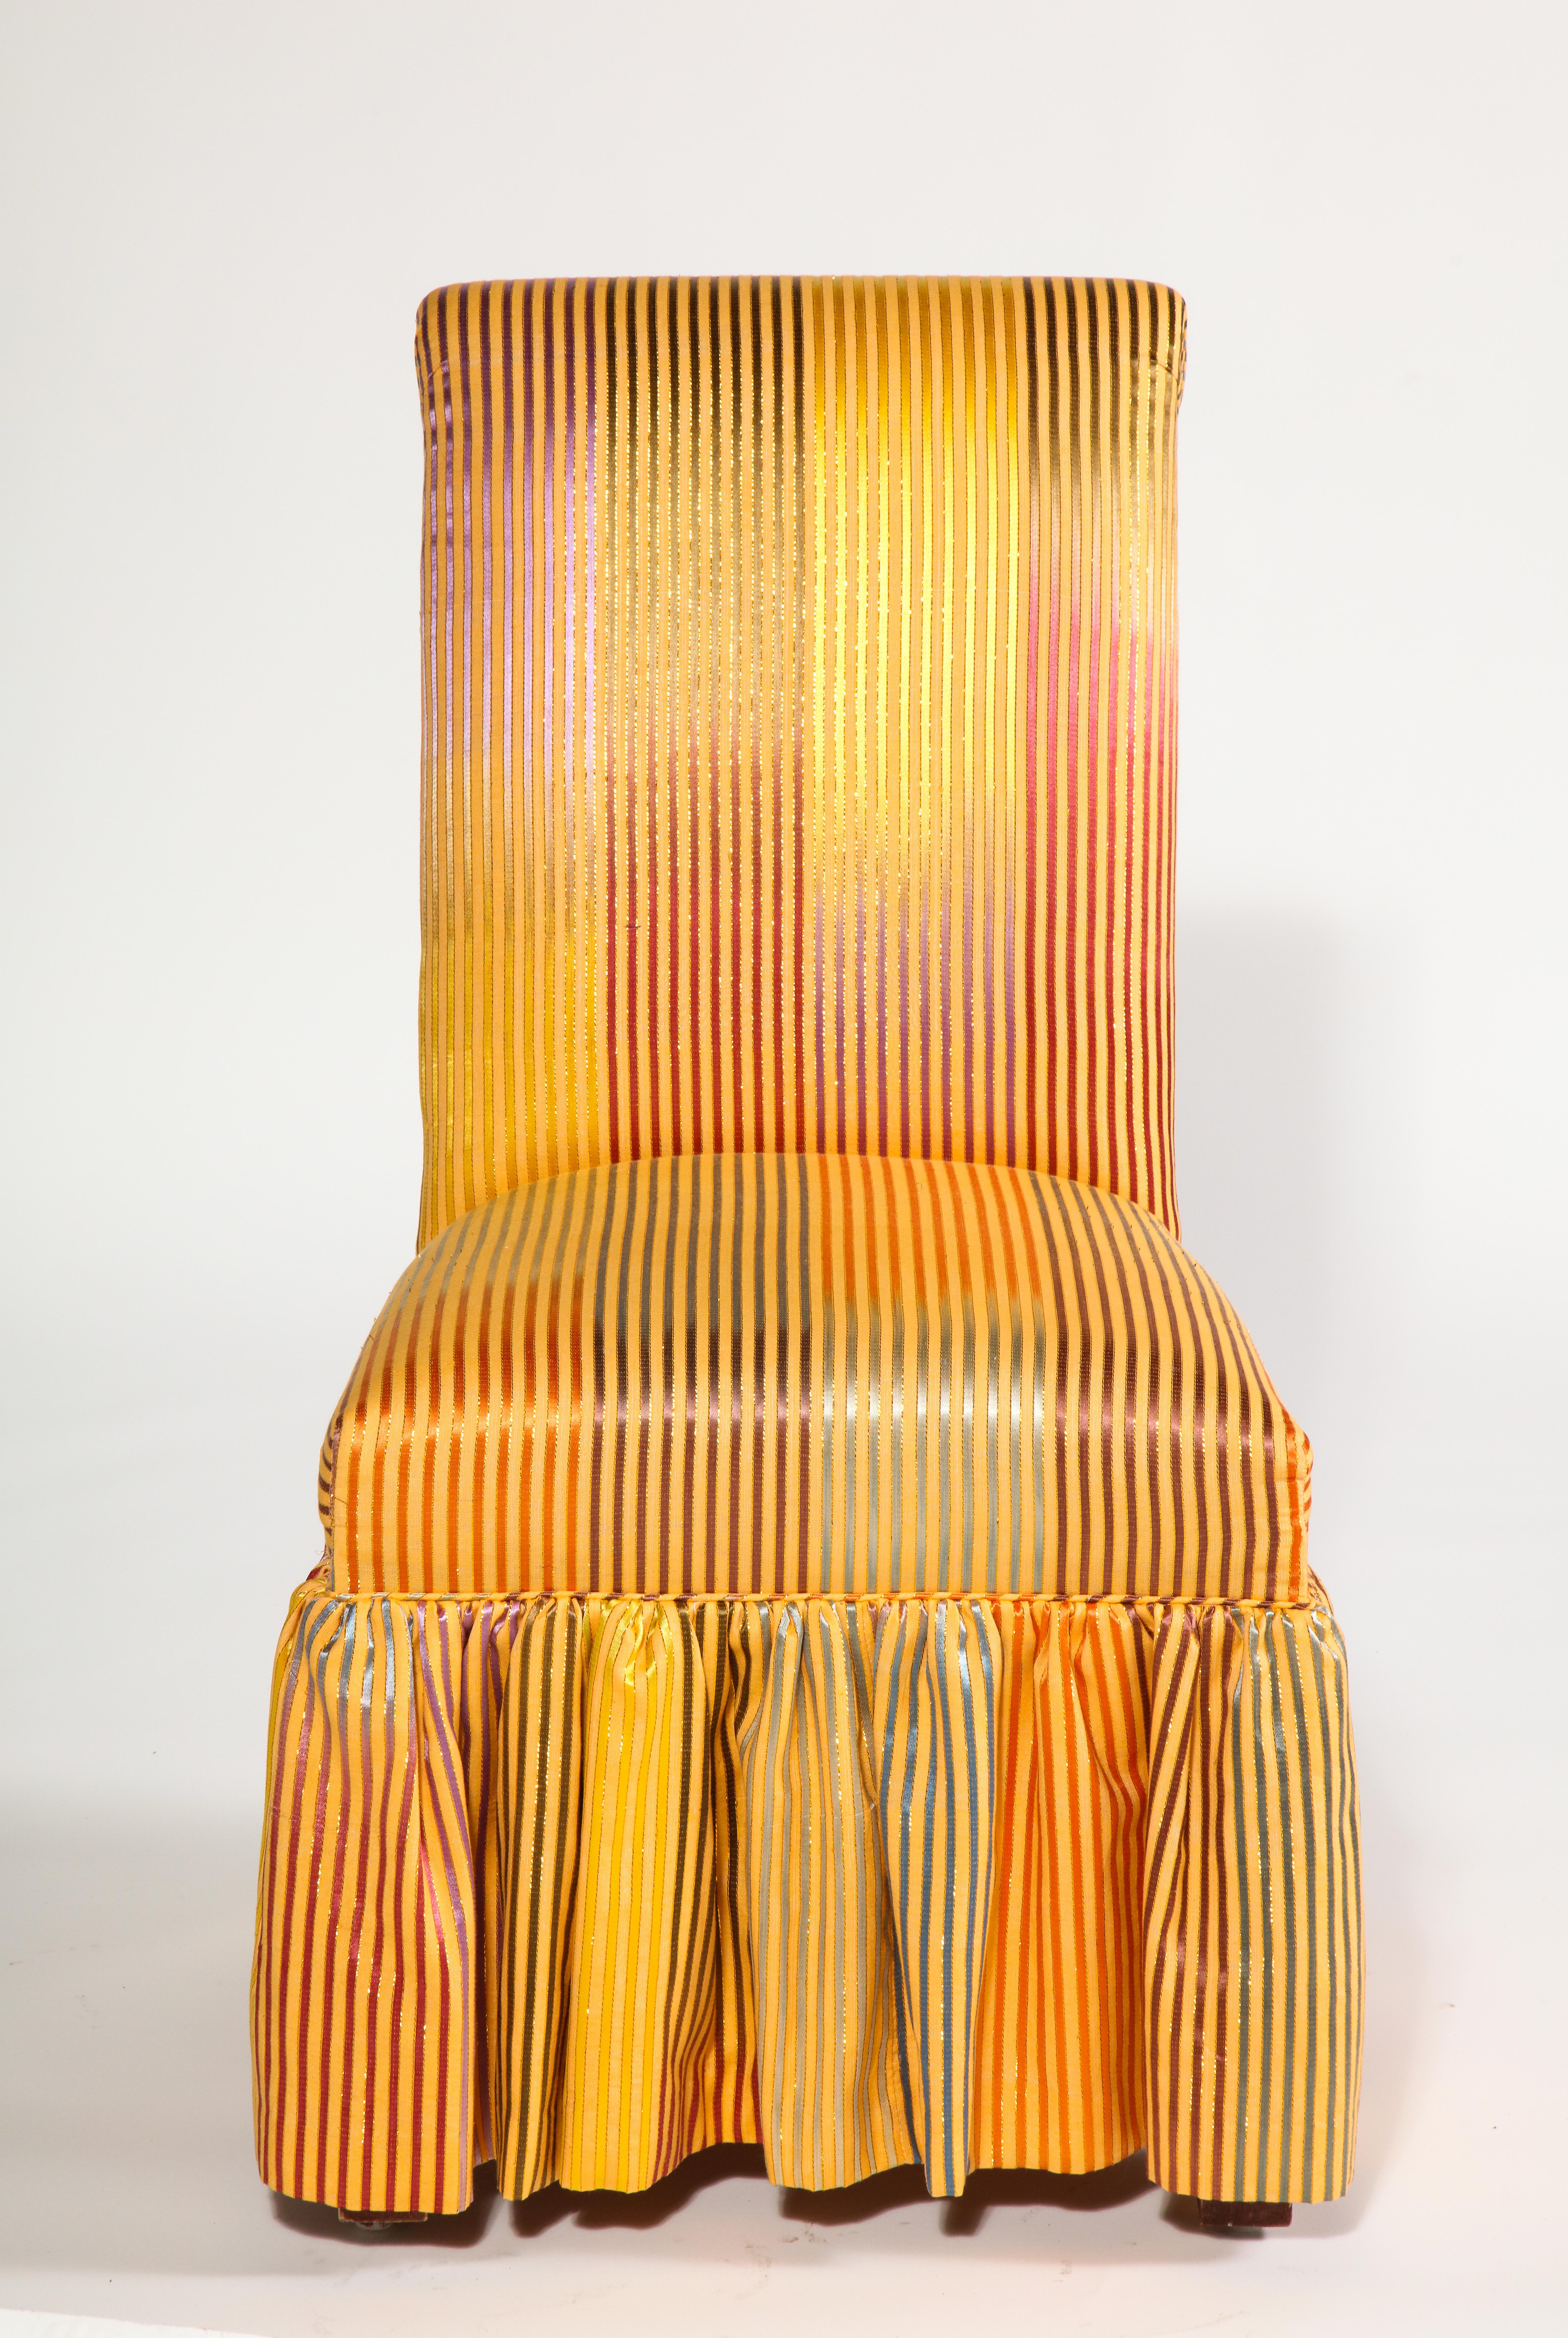 Skirted Side Chair with Metallic Iridescent Stripes For Sale 4